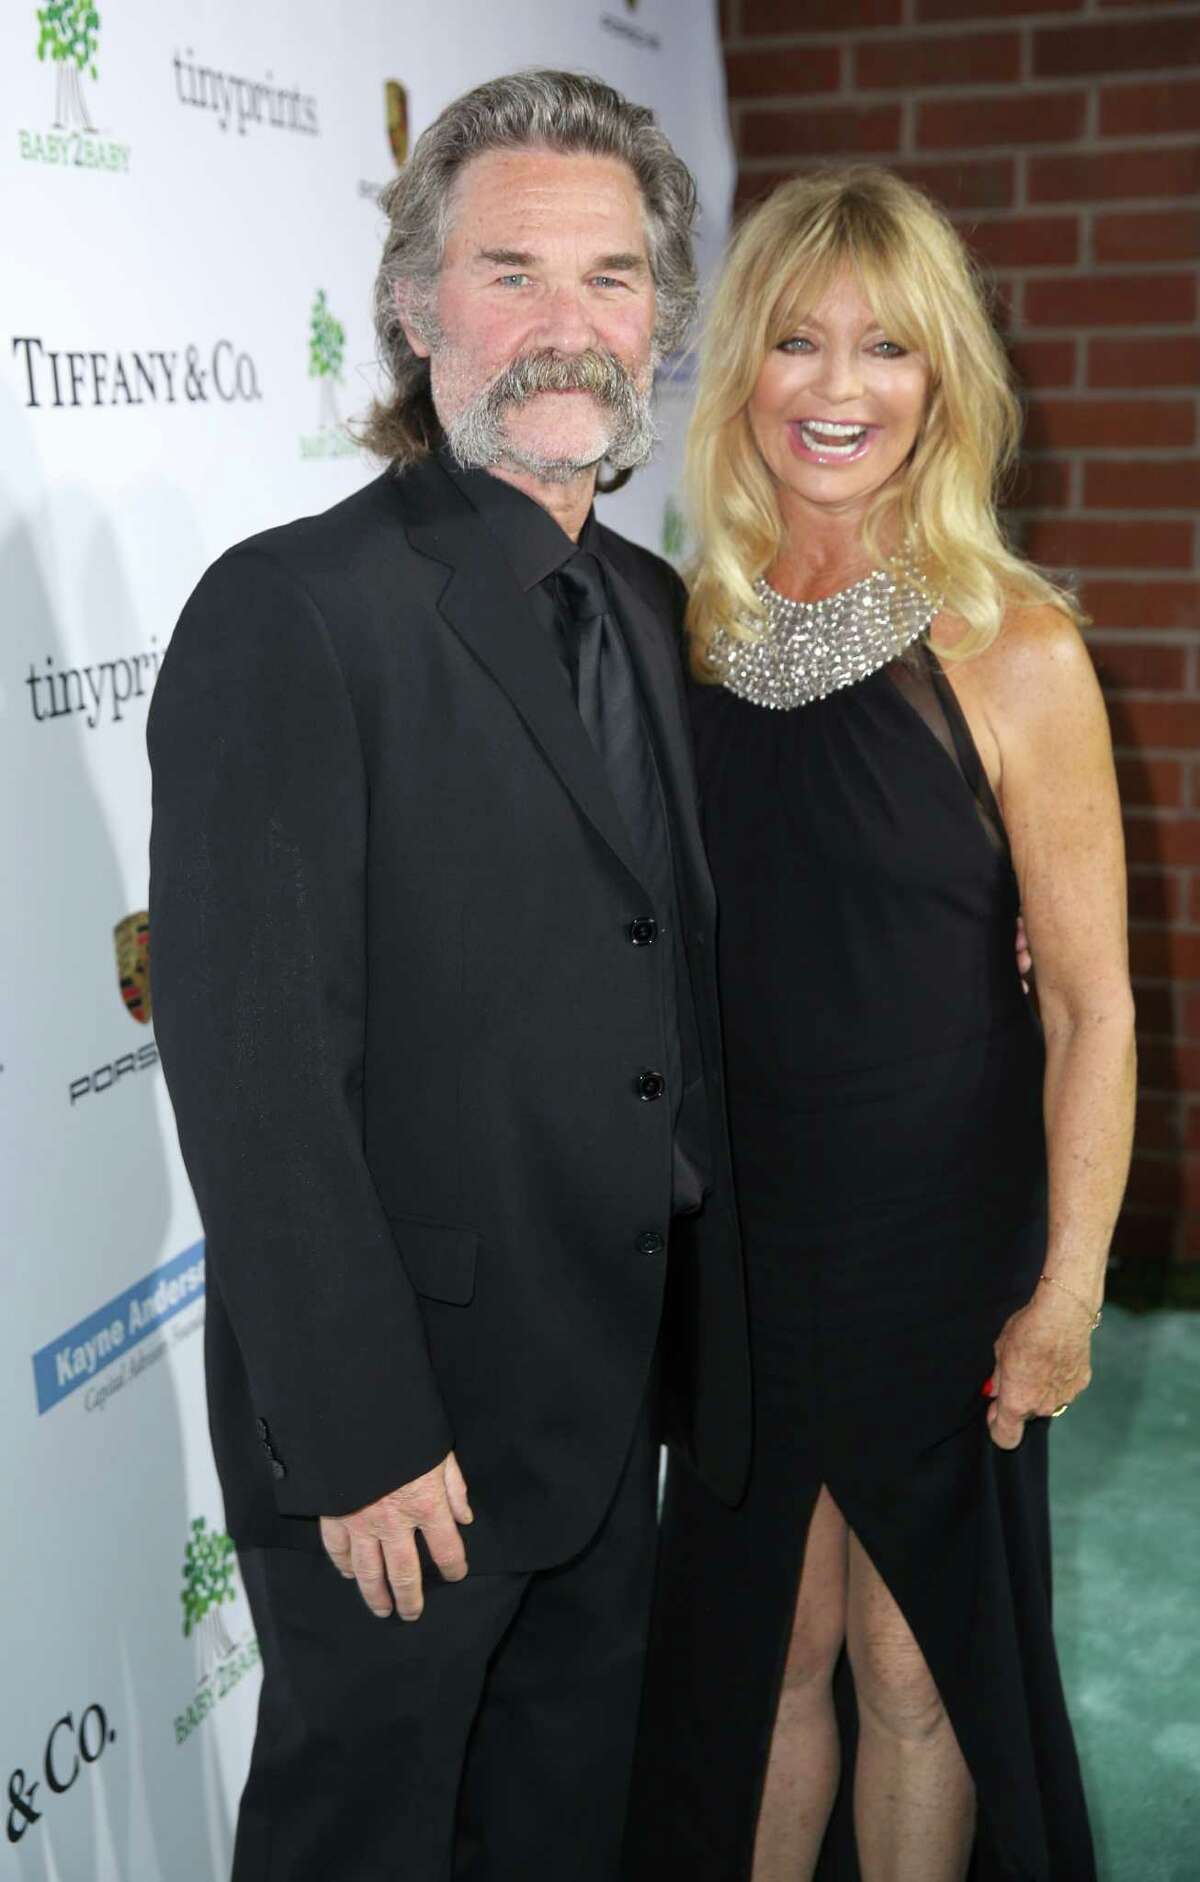 Kurt Russell, left, and Goldie Hawn arrive at the Third annual Baby2Baby Gala honoring Kate Hudson at The Book Bindery on Saturday, Nov. 8, 2014, in Culver City, Calif. (Photo by Matt Sayles/Invision/AP) ORG XMIT: CABR117